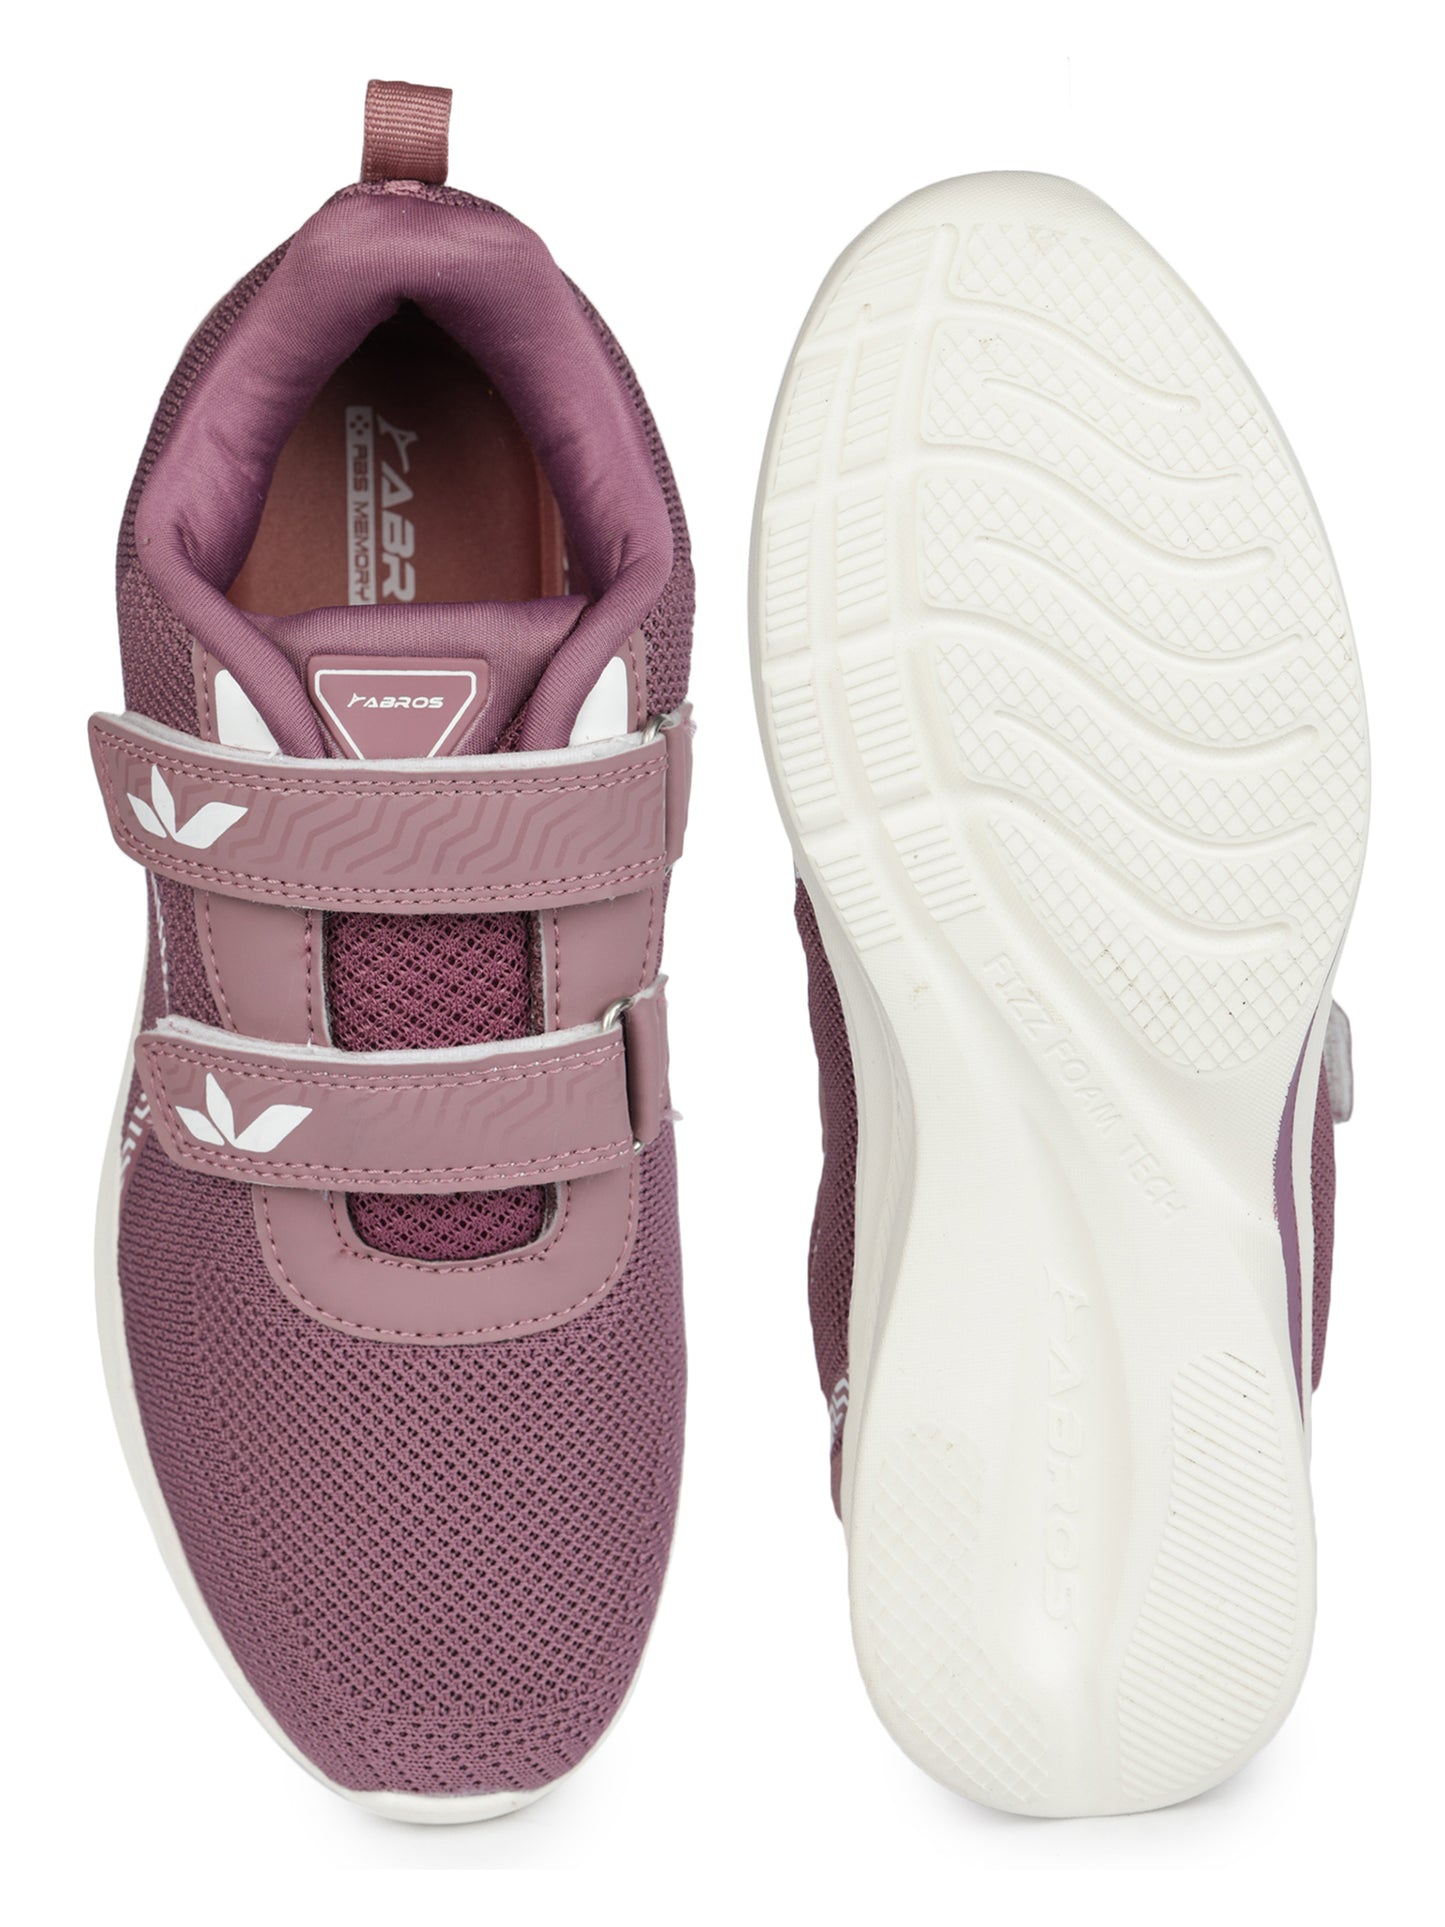 LONDON SPORT-SHOES FOR LADIES